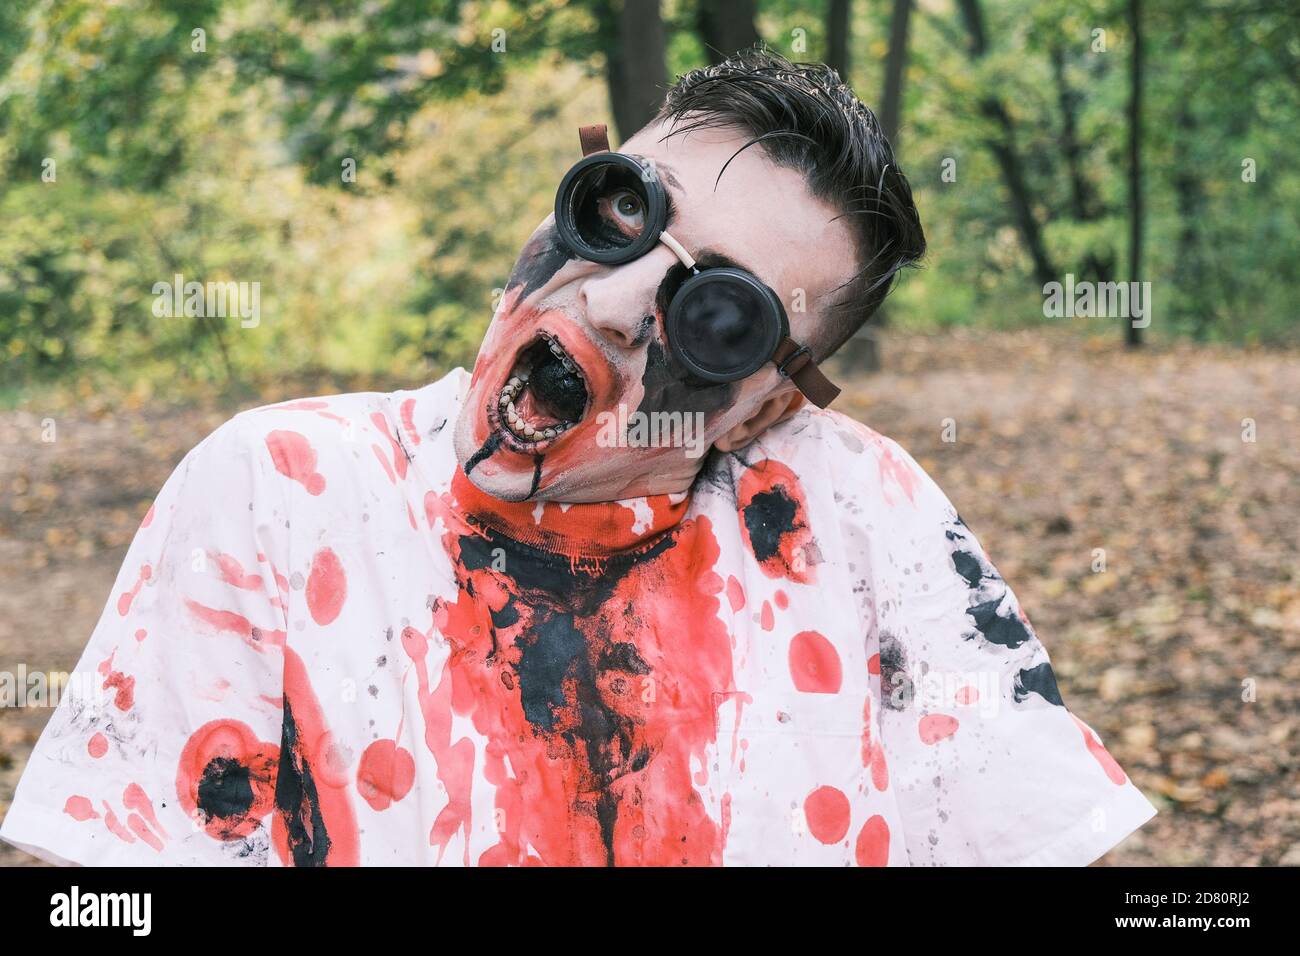 Horror, halloween and zombie concept. Portrait of an eerie man with zombie makeup with blood stains and black liquid in his mouth wriggles against bac Stock Photo